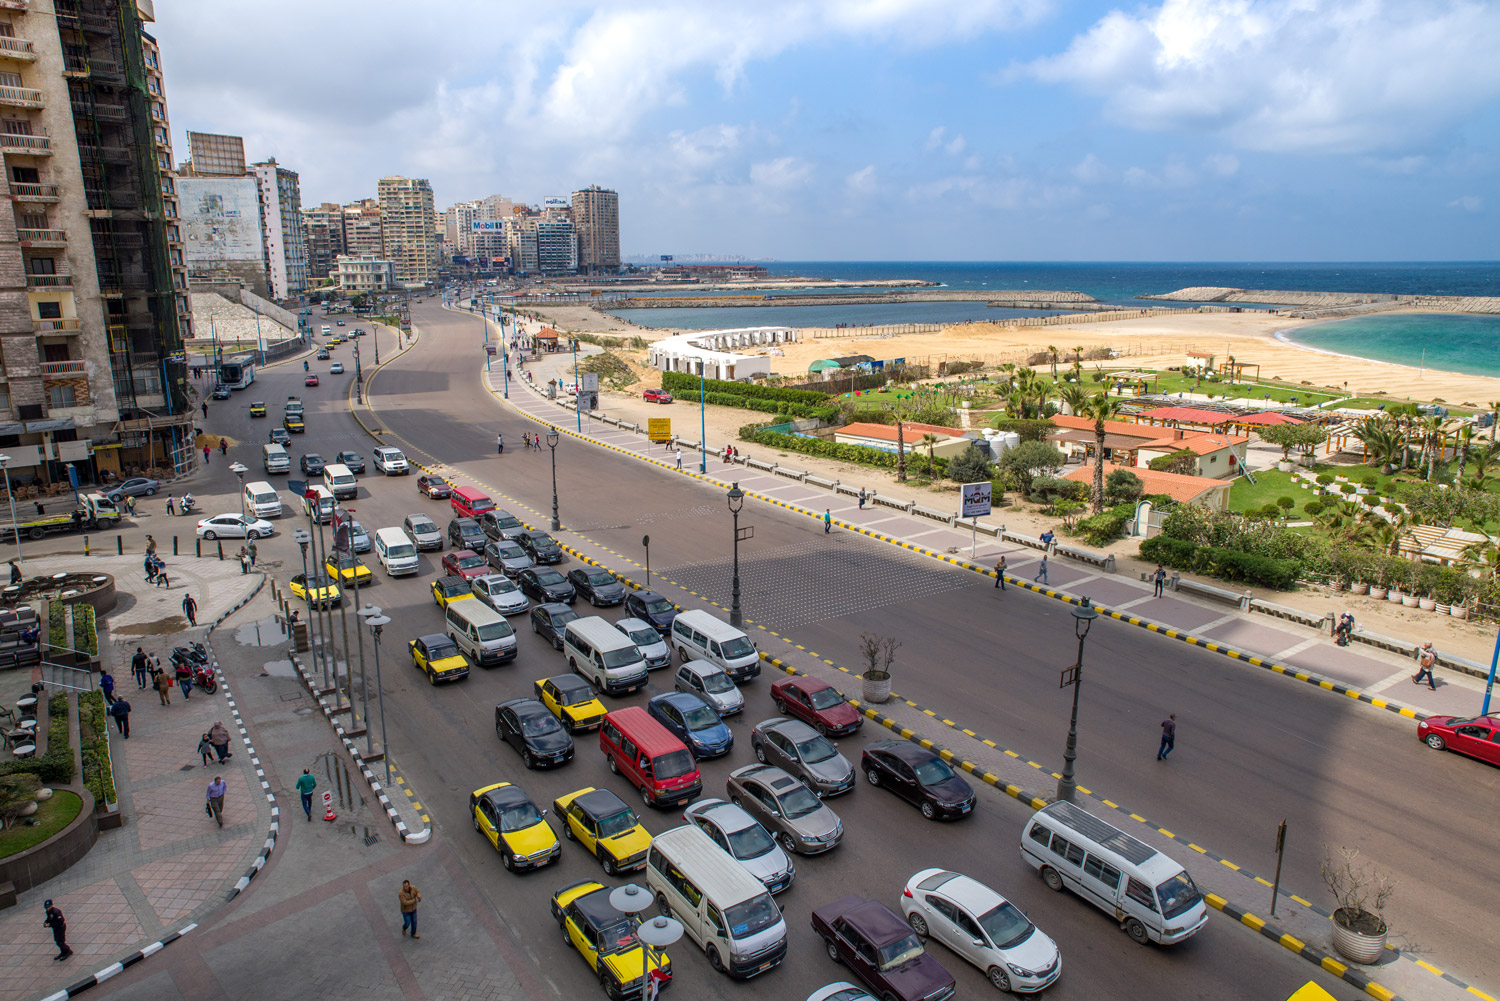 The sea-side city of Alexandria was struck by a terror bombing in Palm Sunday in April, killing 16 at St Marks Cathedral. On the same day a second bombing killed scores of people at a church service in Tanta, a city in the Nile Delta.   